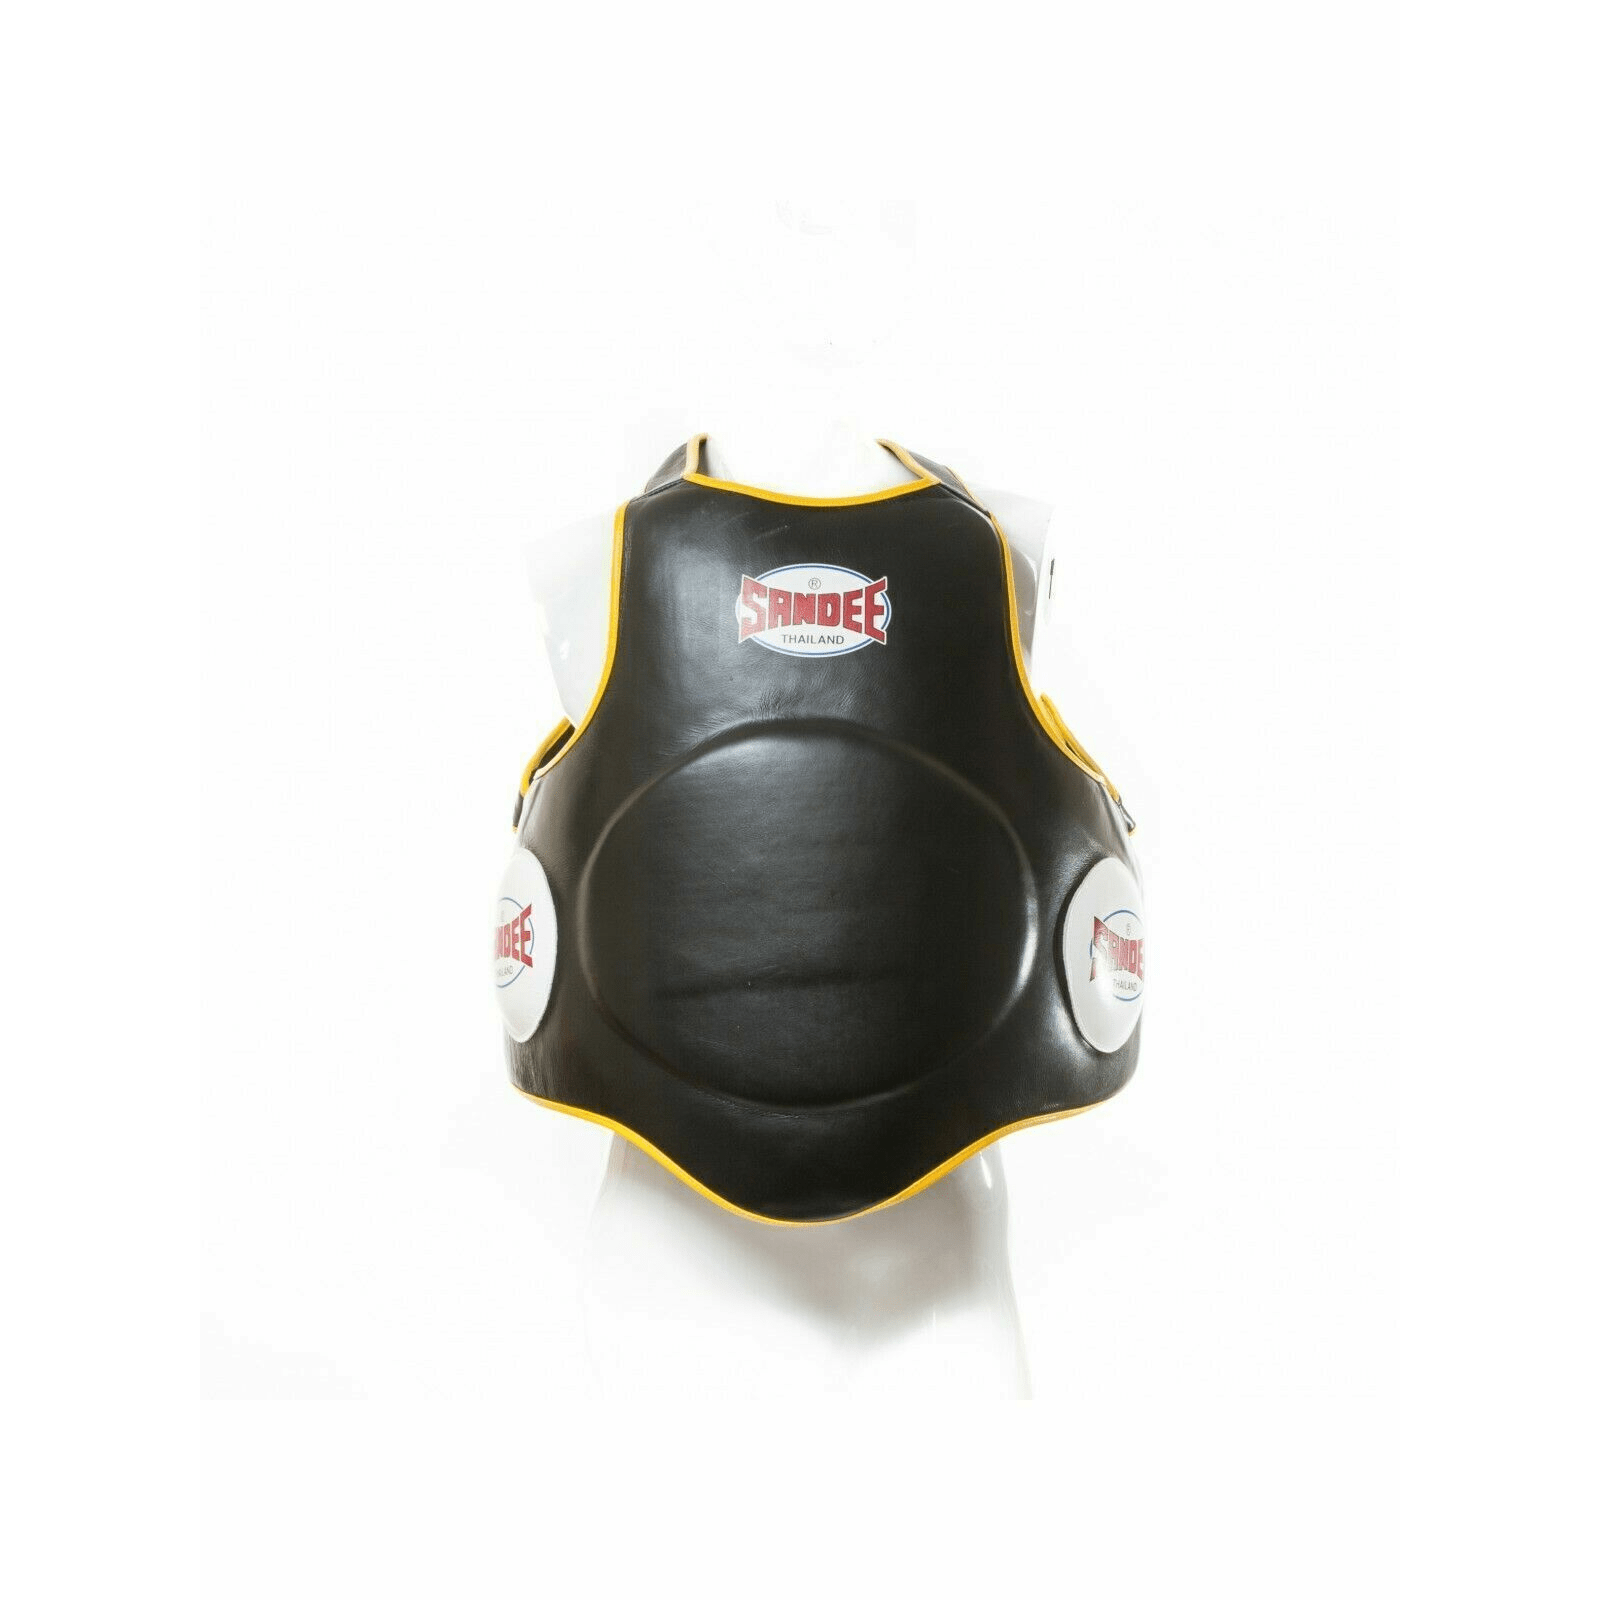 Sandee Leather Black & Yellow Full Coaching Muay Thai Boxing  Fight Co